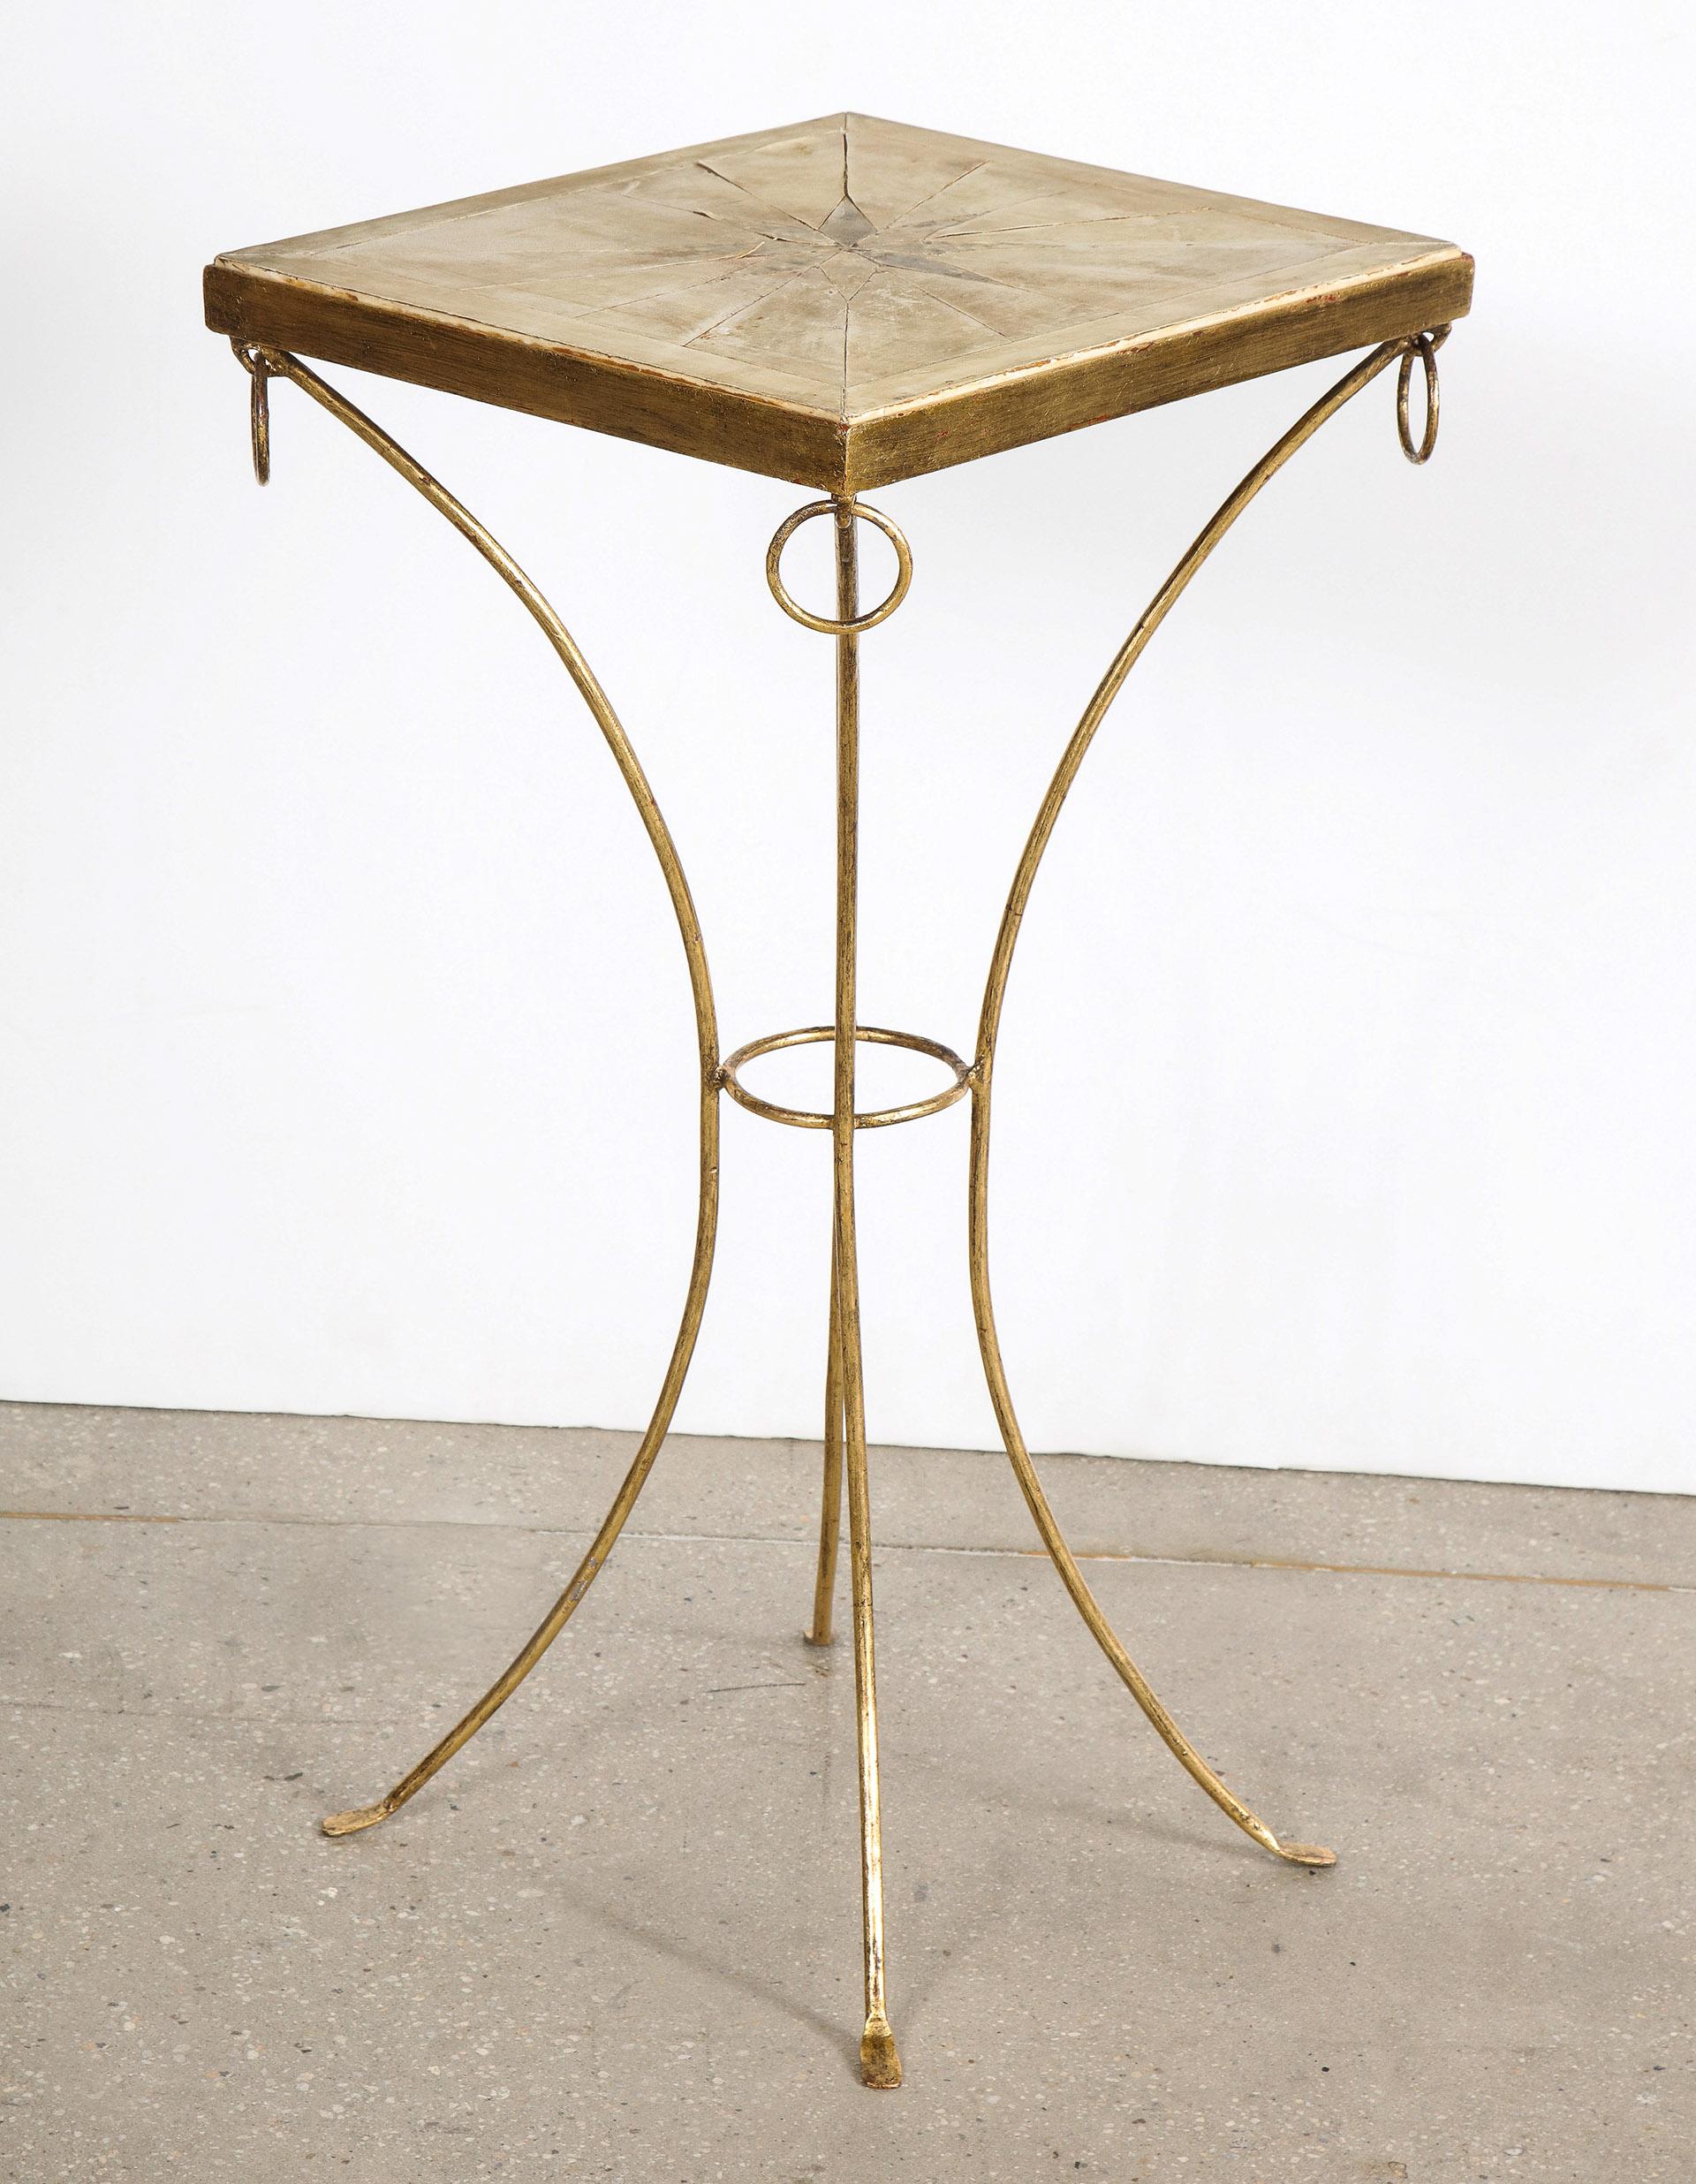 French Art Deco gilt iron and parchment pedestal table, in the manner of Jean-Michel Frank

The top of parchment layered down in a marquetry star pattern, on gilt iron frame supported by gilt iron legs.